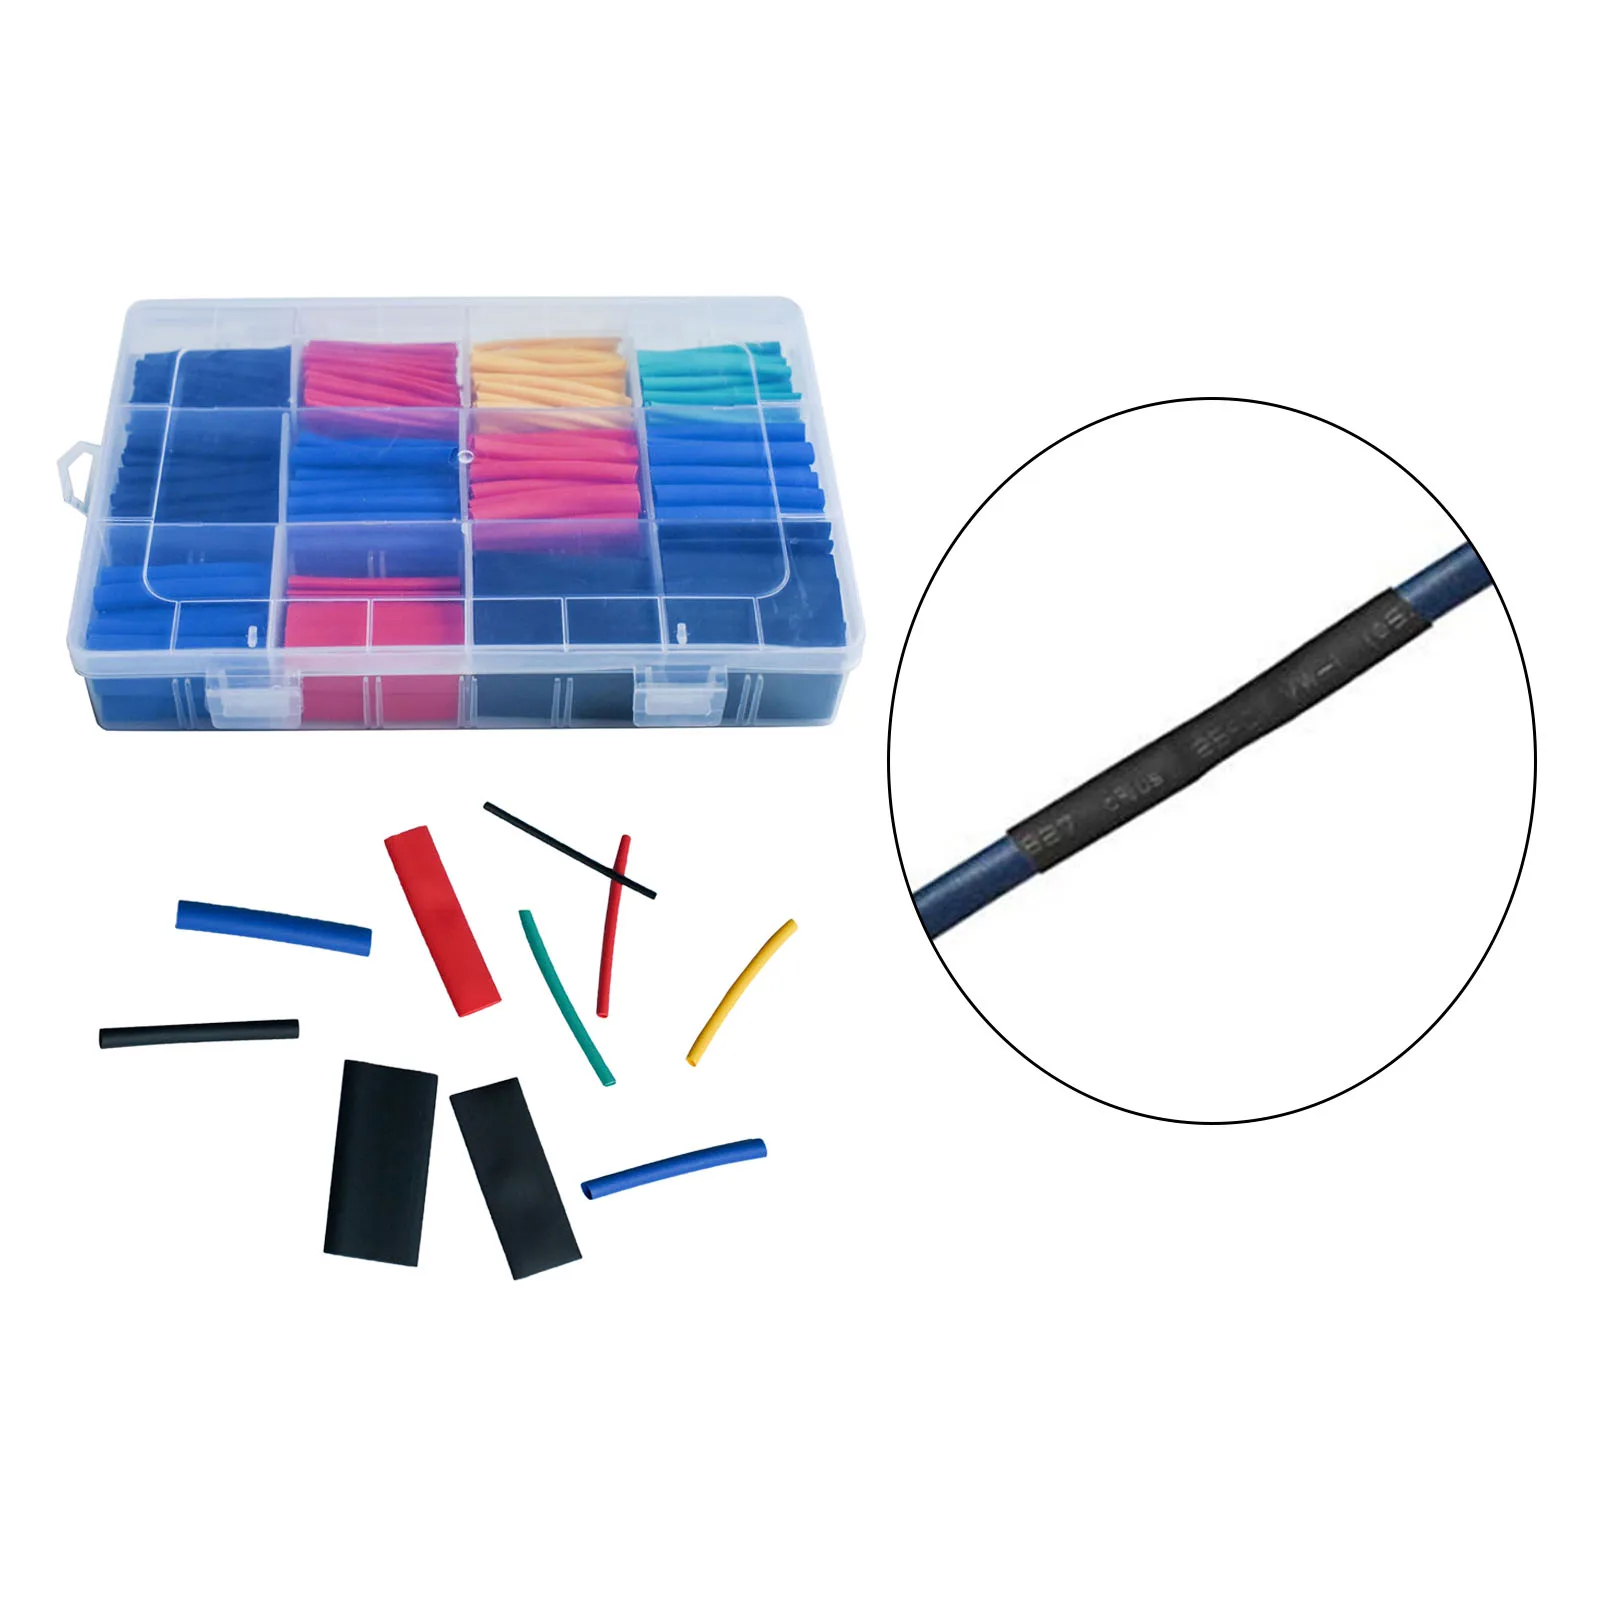 750Pcs Heat Shrink Tubing Kit Electrical Cable Sleeve Assortment Insulation Protection with Storage Case